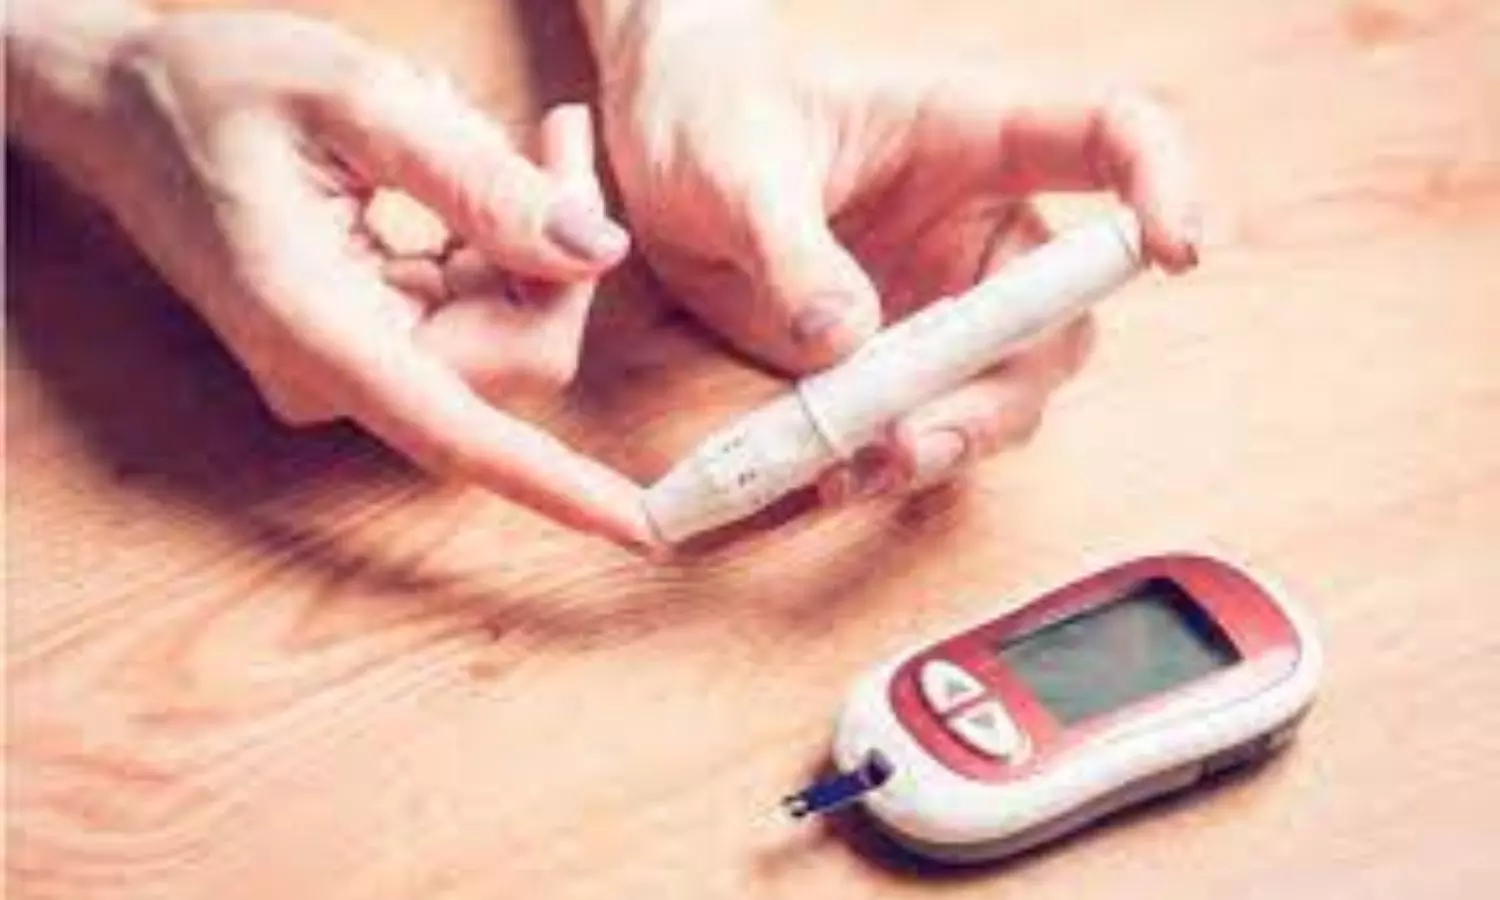 Higher fasting blood sugar worsens knee symptoms in patients with knee osteoarthritis